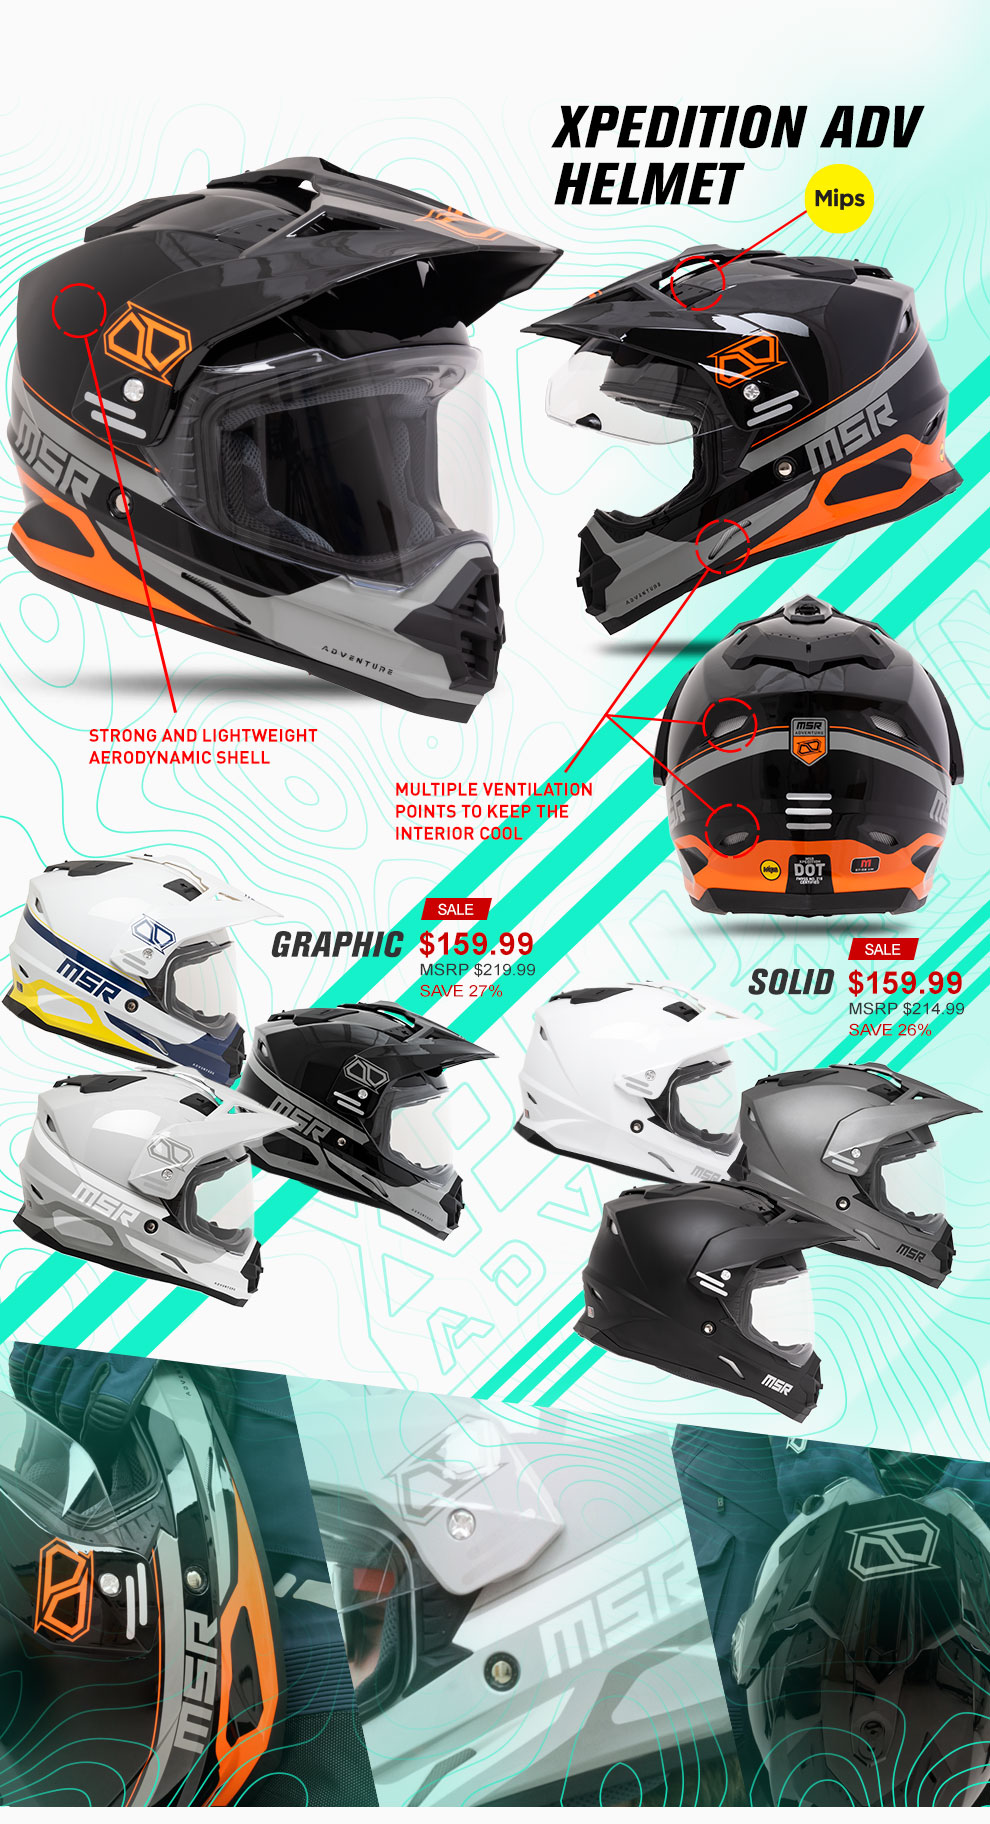 Xpedition ADV Helmet, Mips with a callout line running from the mips logo to the crown of the MSR helmet, Lightweight yet strong aerodynamic poly alloy shell, with a callout line that runs tot he shell of the helmet, Multiple Ventilation points to keep the interior cool, with a callout line that runs to the vent holes of the helmet, Graphic version one hundred and seventy nine dollars and nintey nine cents, MSRP two hundred and ninteen dollars and ninety nine cents, save eighteen percent, Solid version one hundred and seventy four dollars and ninety nine cents, MSRP two hundred and fourteen dollars and nintey nine cents, save ninteen percent, image of the orange and black helmet from three quarter view, profile view and behind view, profile view of the graphic helmets in various colors and styles, profile vew of the solid helmets in various colors, with various topographic textures and line work watermarked underneath, and a photo collage of the helmets at the bottom, link the Xpeidtion Helmet product page